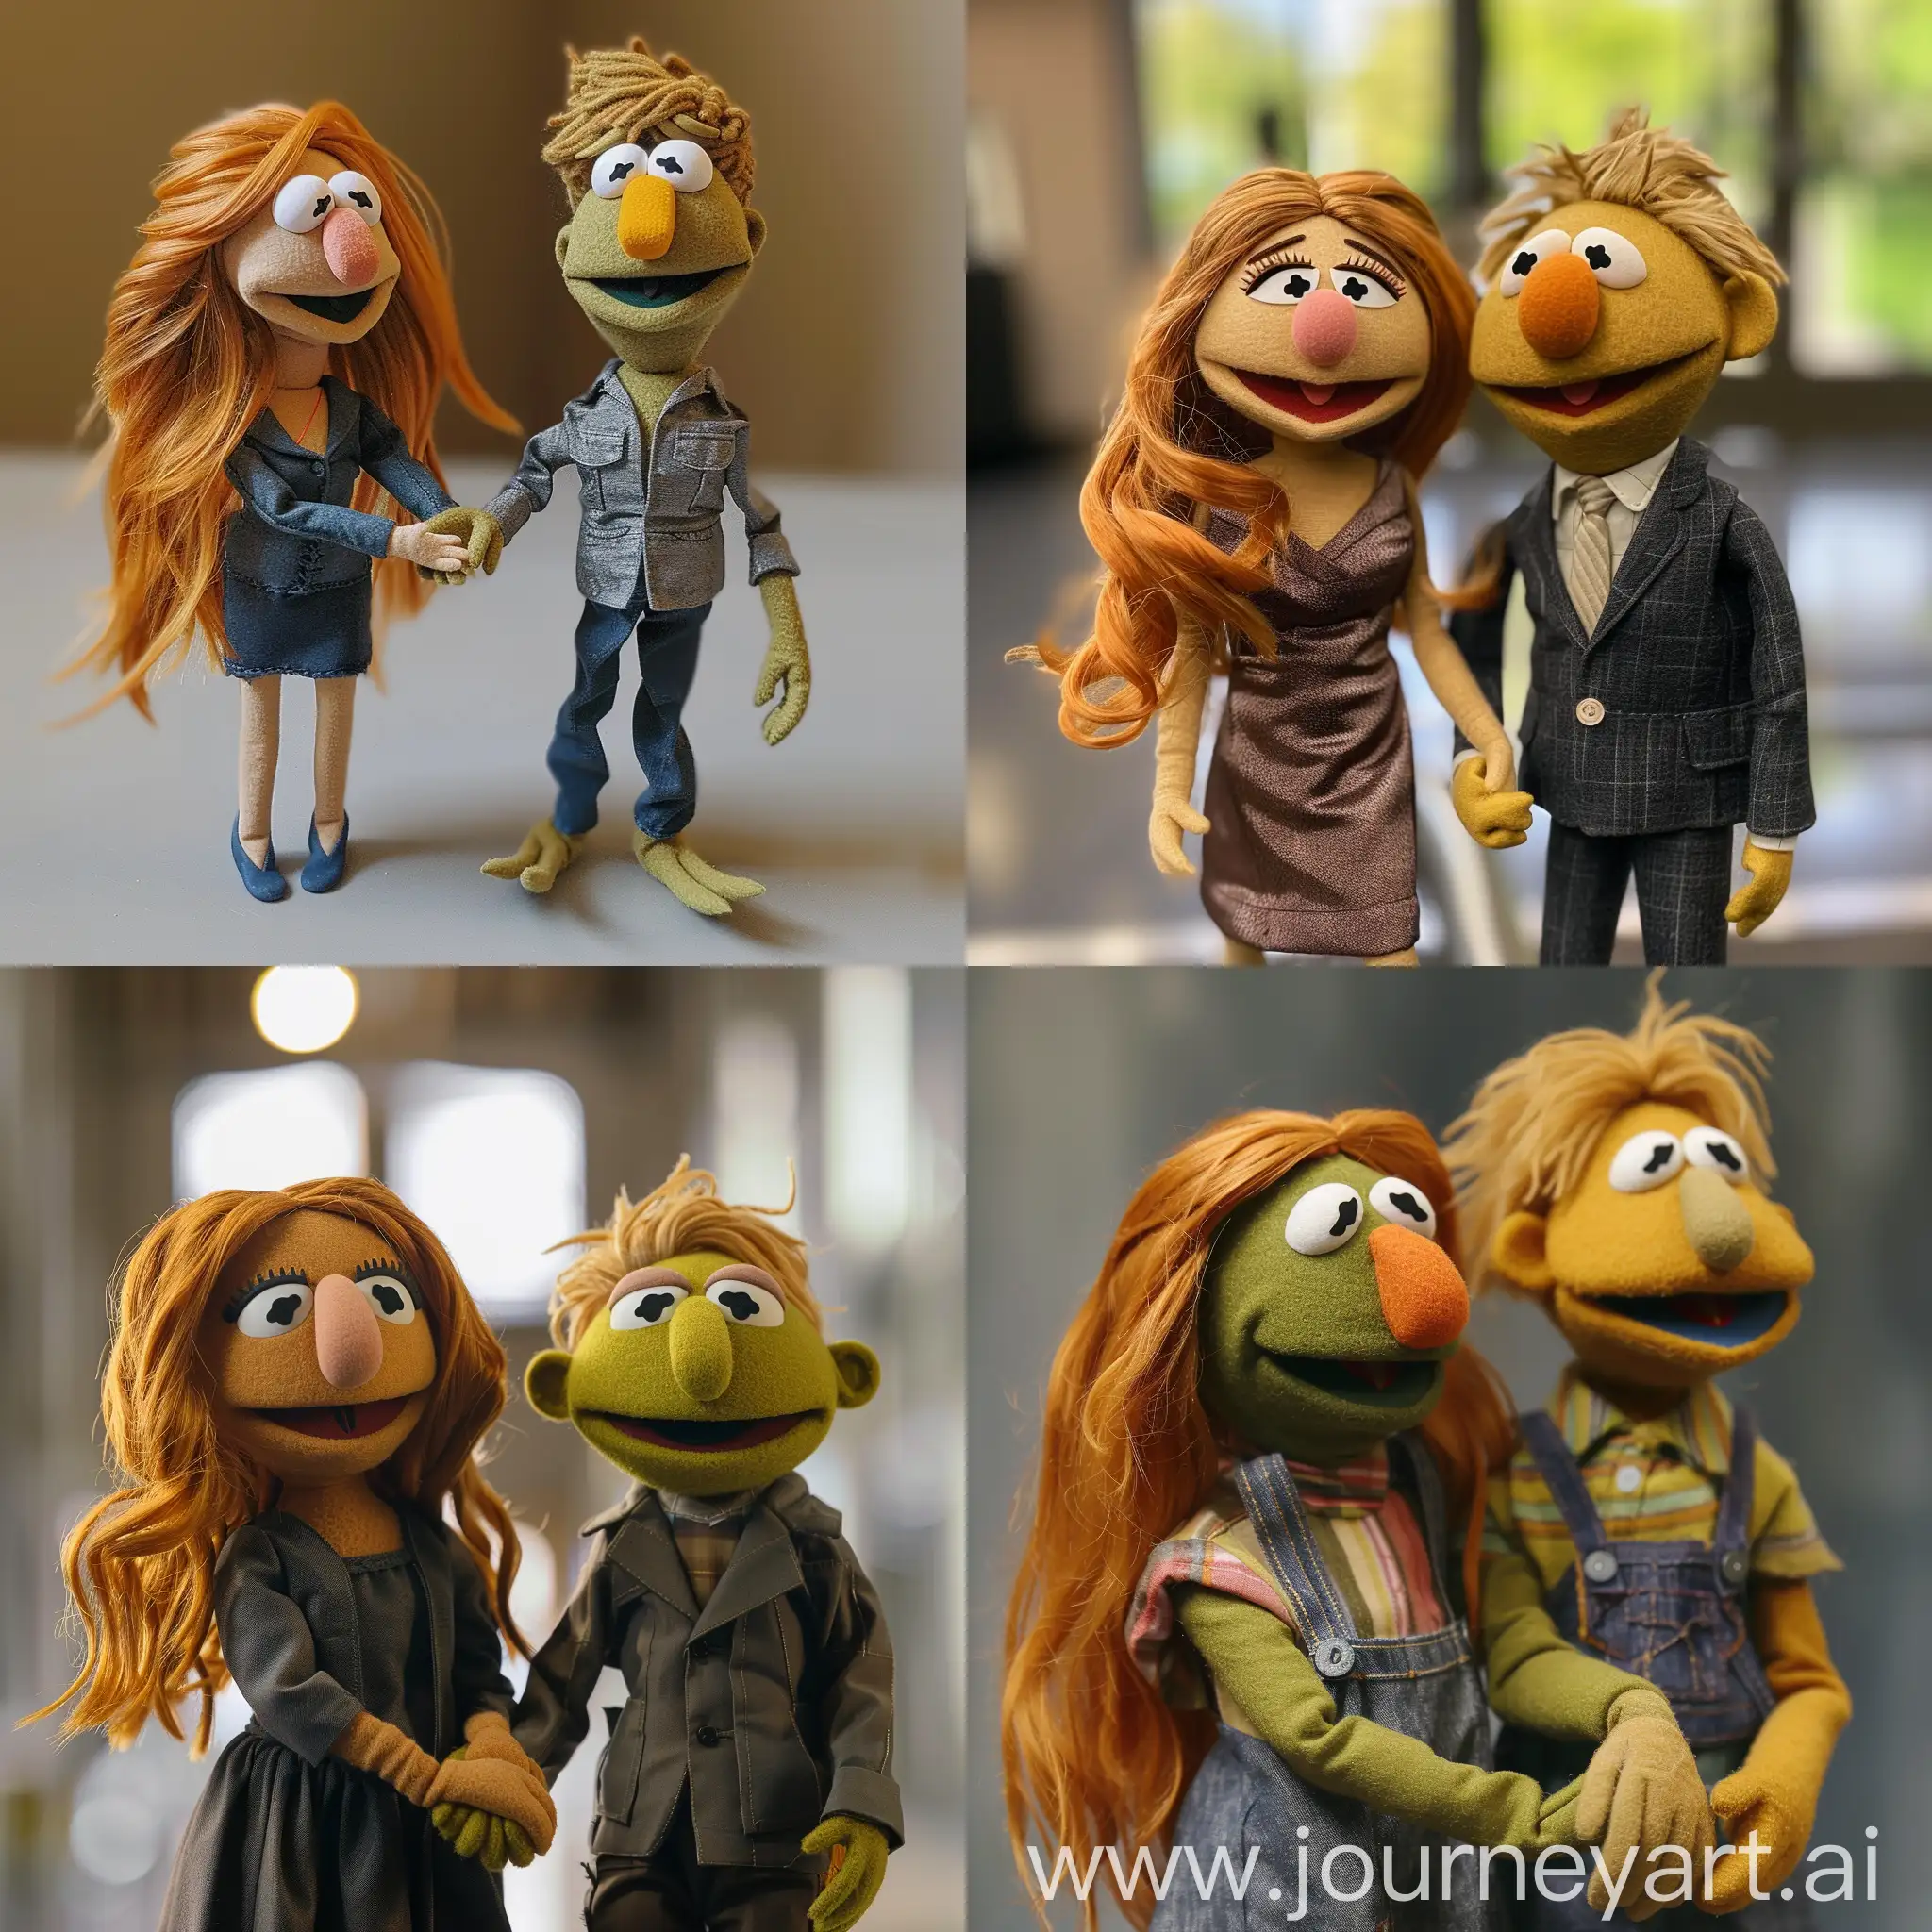 In the style of Jim Henson muppets from Sesame Street; Muppets. First muppet is a 25 year old woman with shoulder length flowing ginger hair parted in the middle. She is holding hands with the 2nd muppet who is a 25 year old man with medium length blonde hair and a pointed nose.